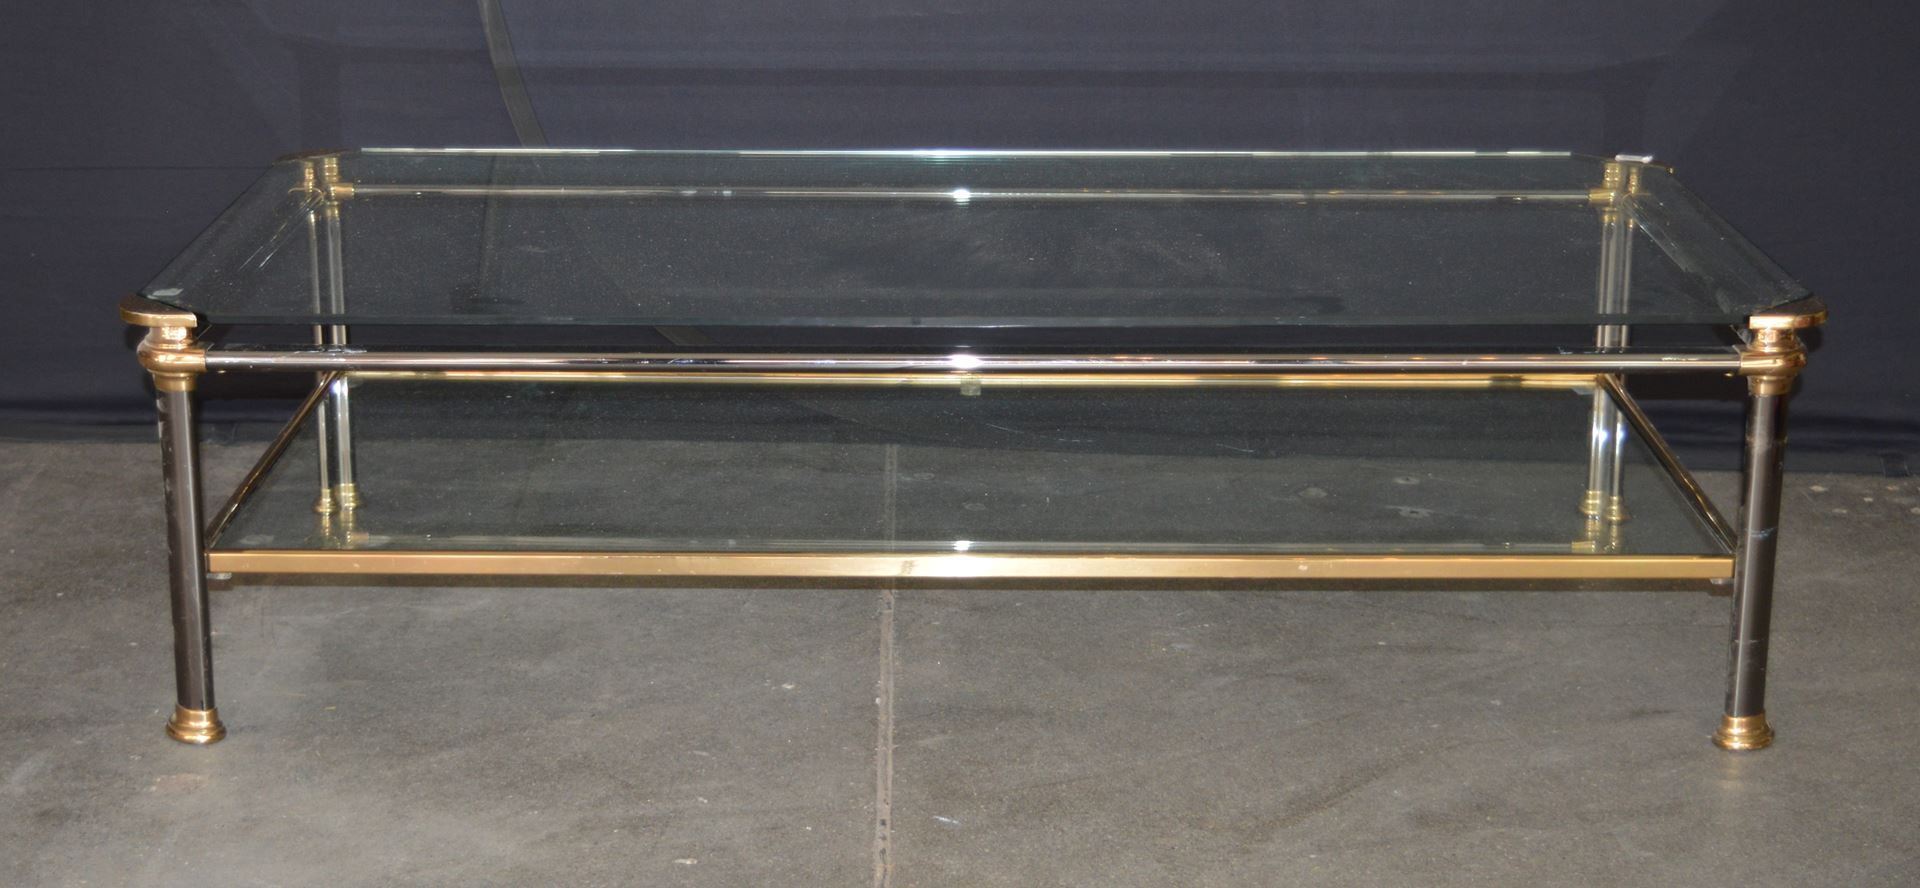 Null Modern coffee table with 2 glass shelves. 140x70 cm. Ht 39 cm